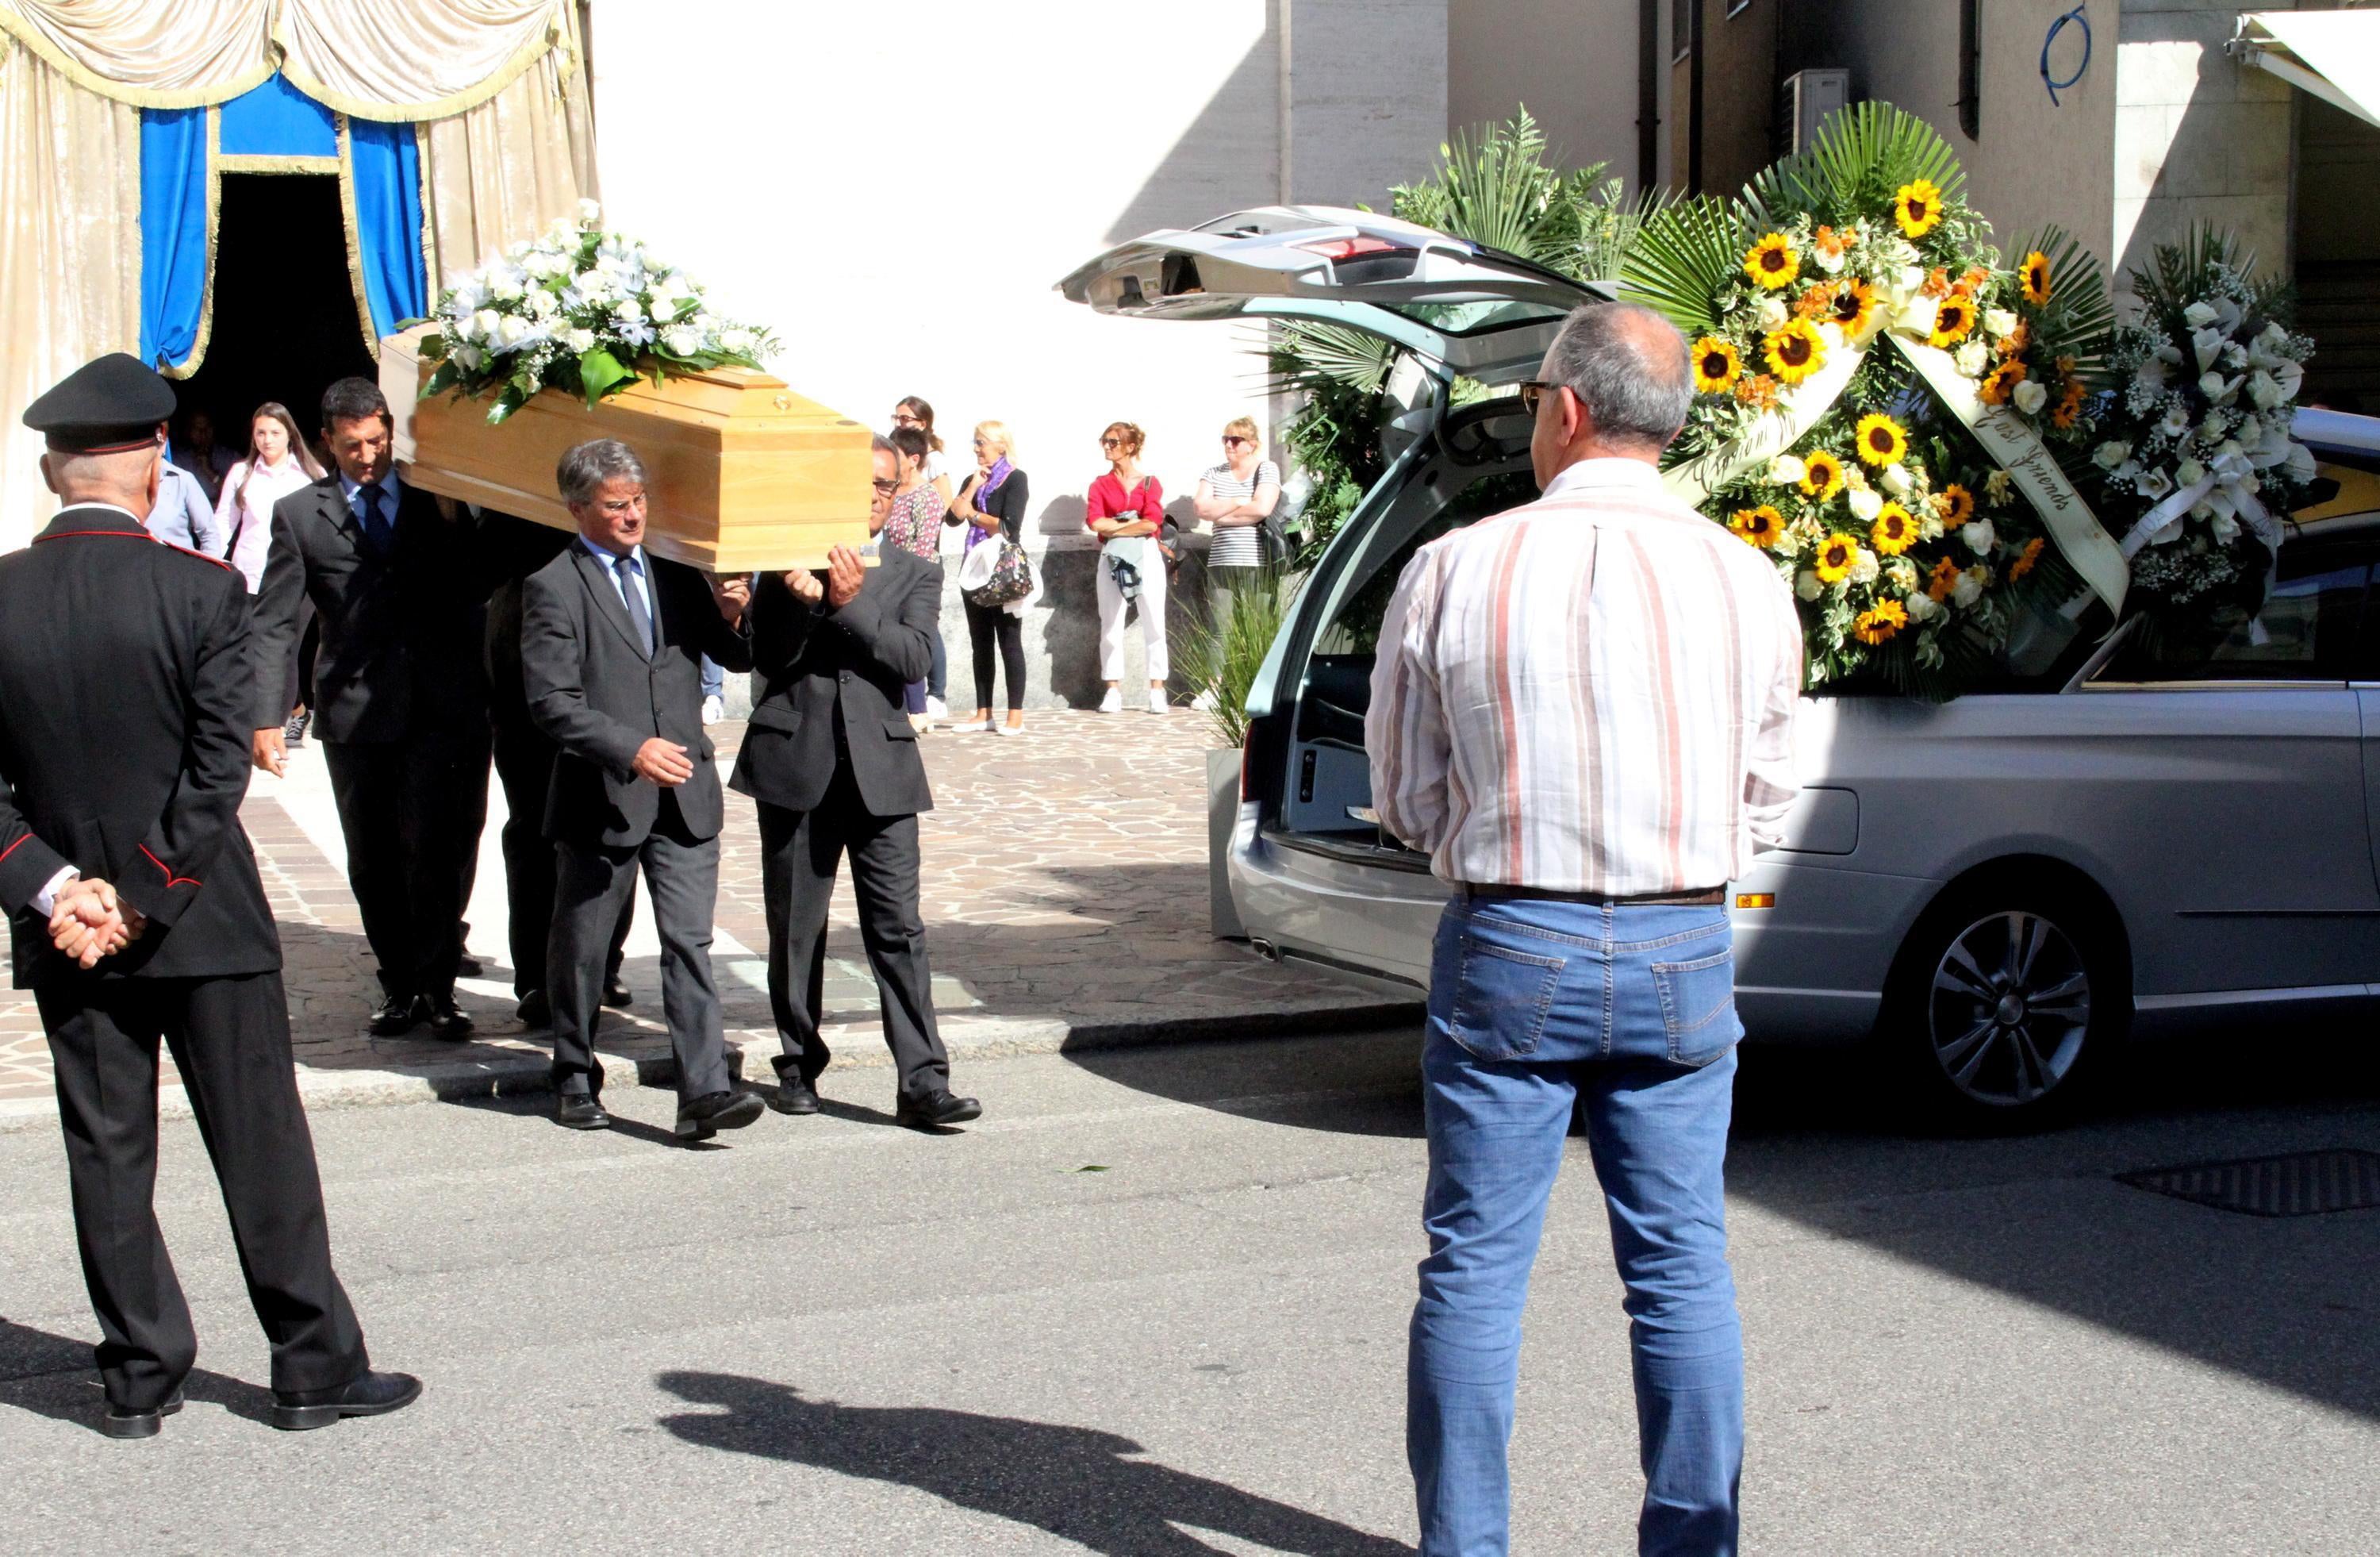 The funeral of Cipriani Dolci chef Andrea Zamperoni in Italy in 2019